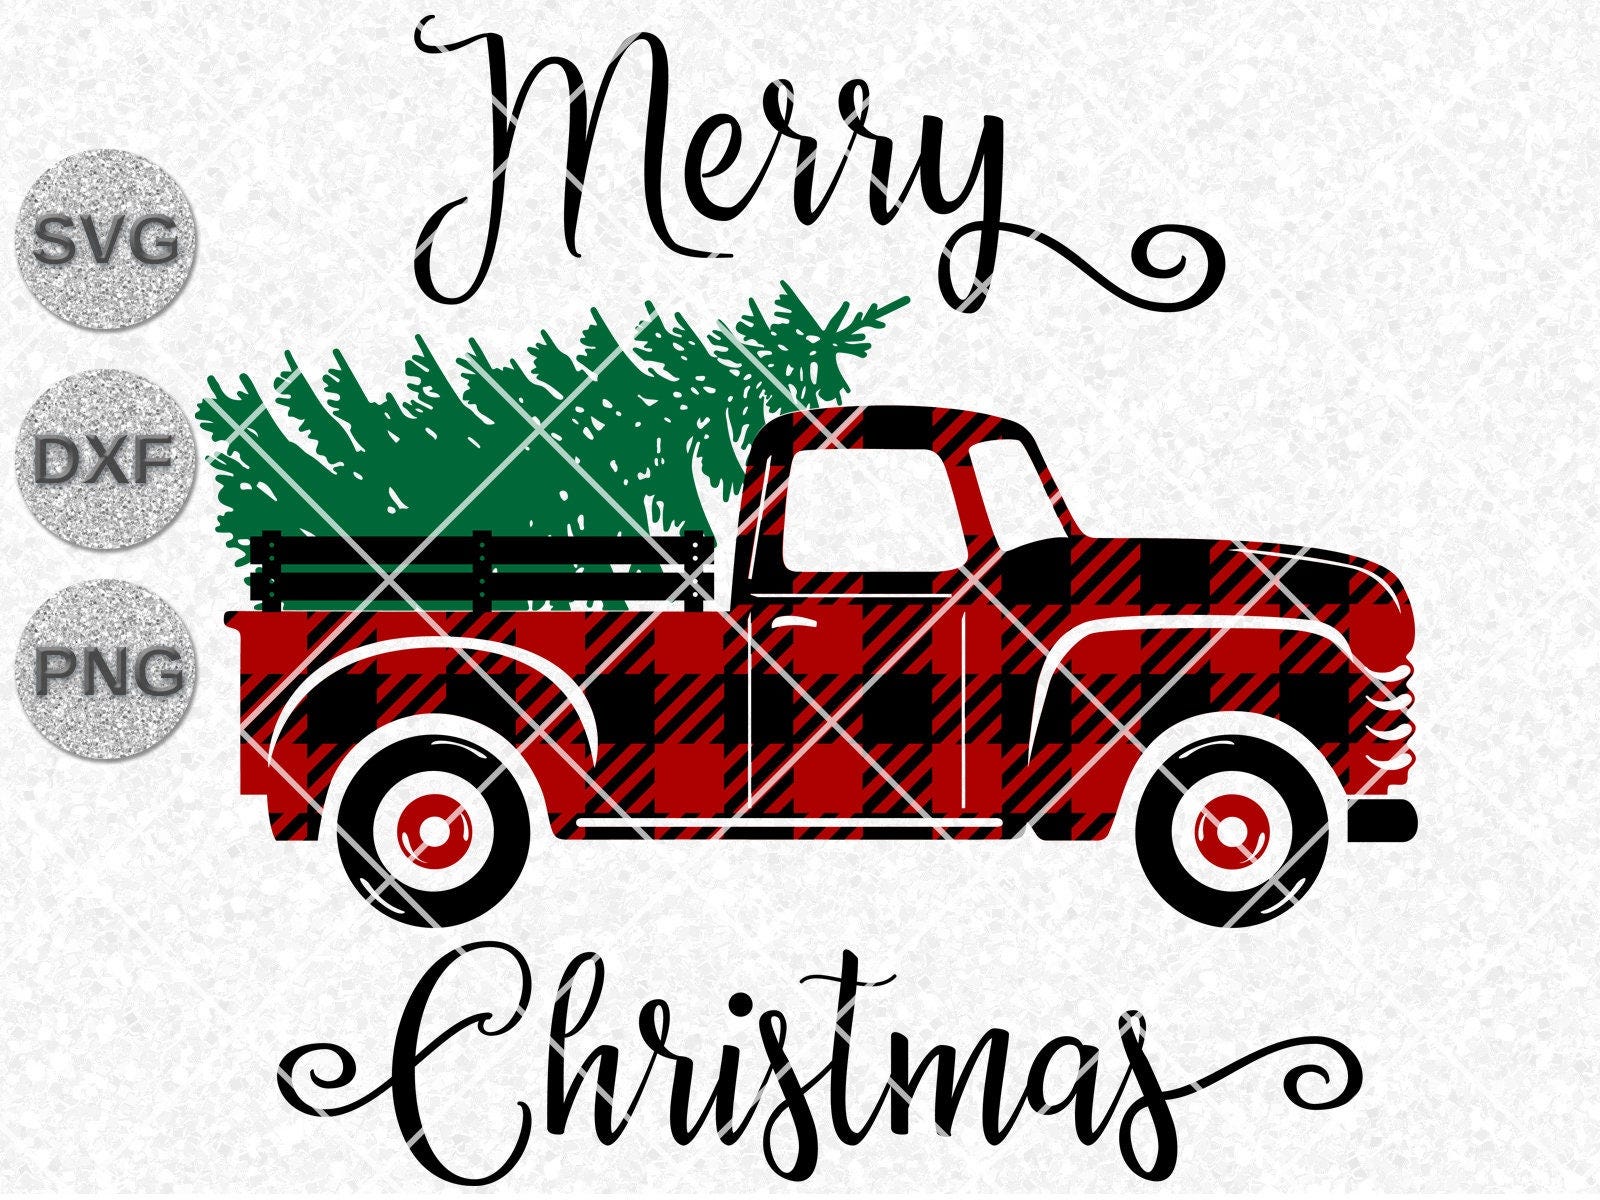 Buffalo plaid Christmas truck svg dxf png, red vintage truck buffalo plaid svg dxf png, vintage truck Christmas svg dxf png clipart shirts